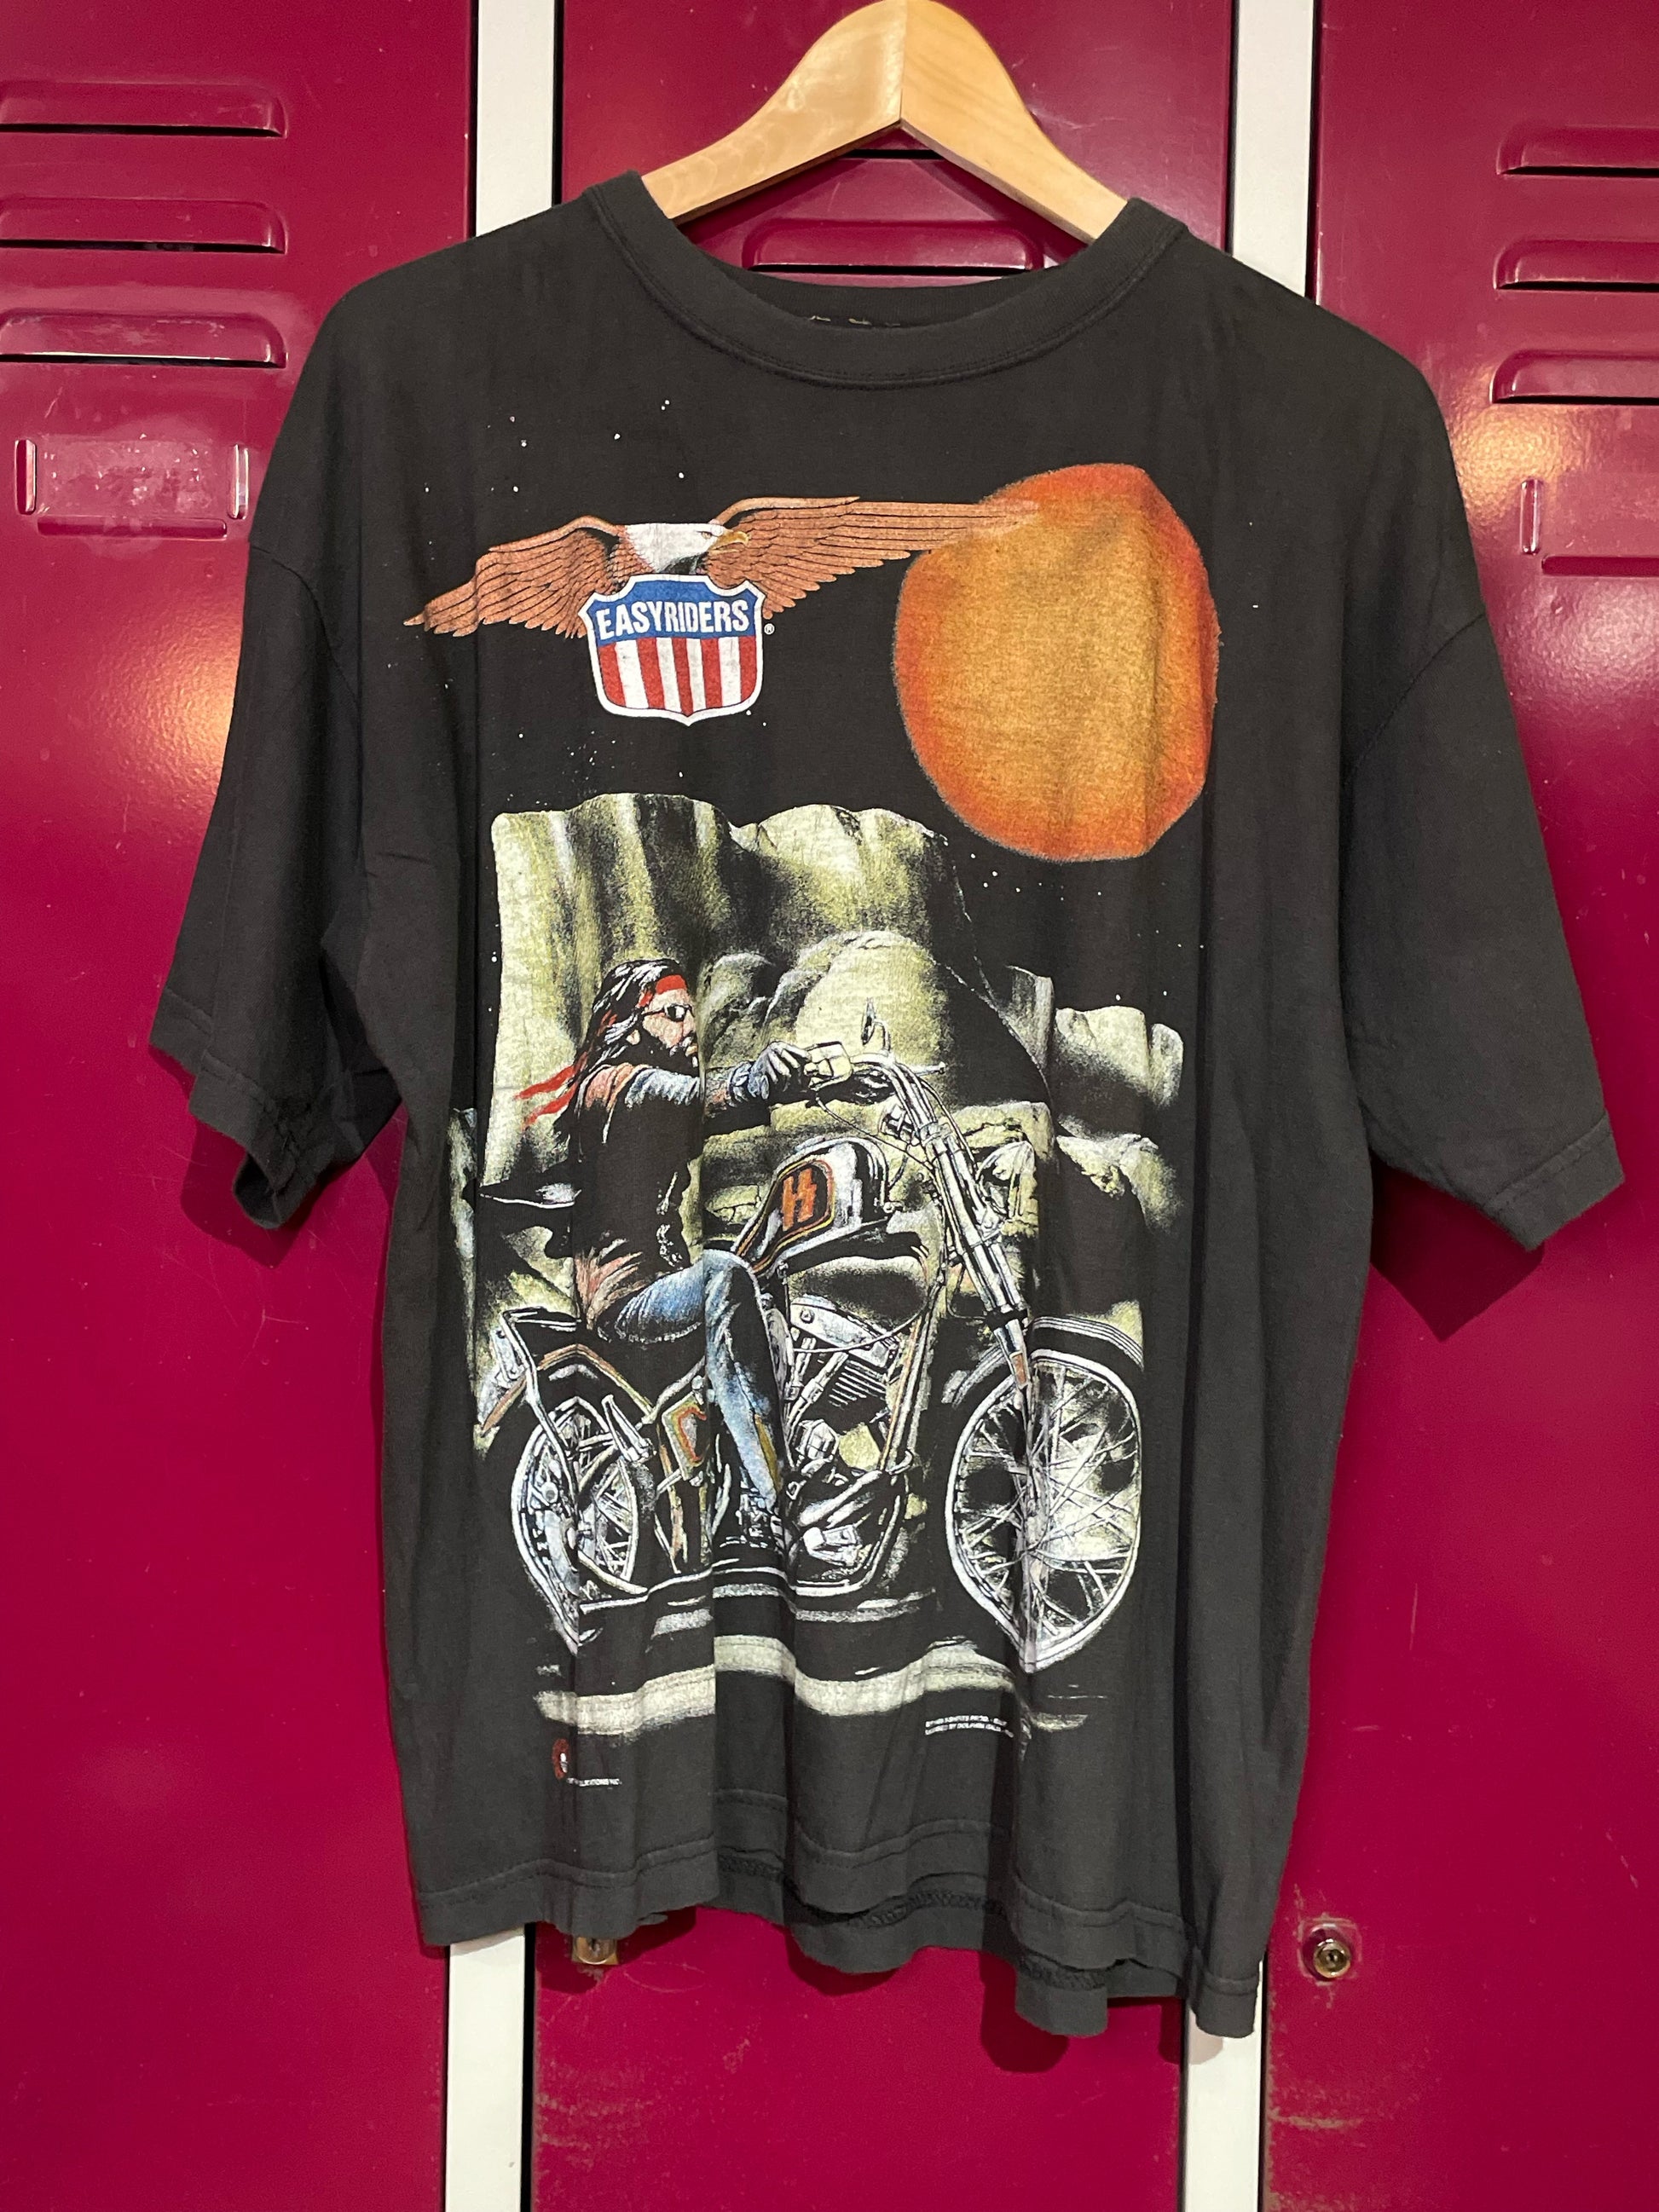 VINTAGE 1999 EASYRIDERS DOUBLE BIG PRINT MOTORCYCLES T-SHIRT SZ: L/XL –  Stay Alive vintage store